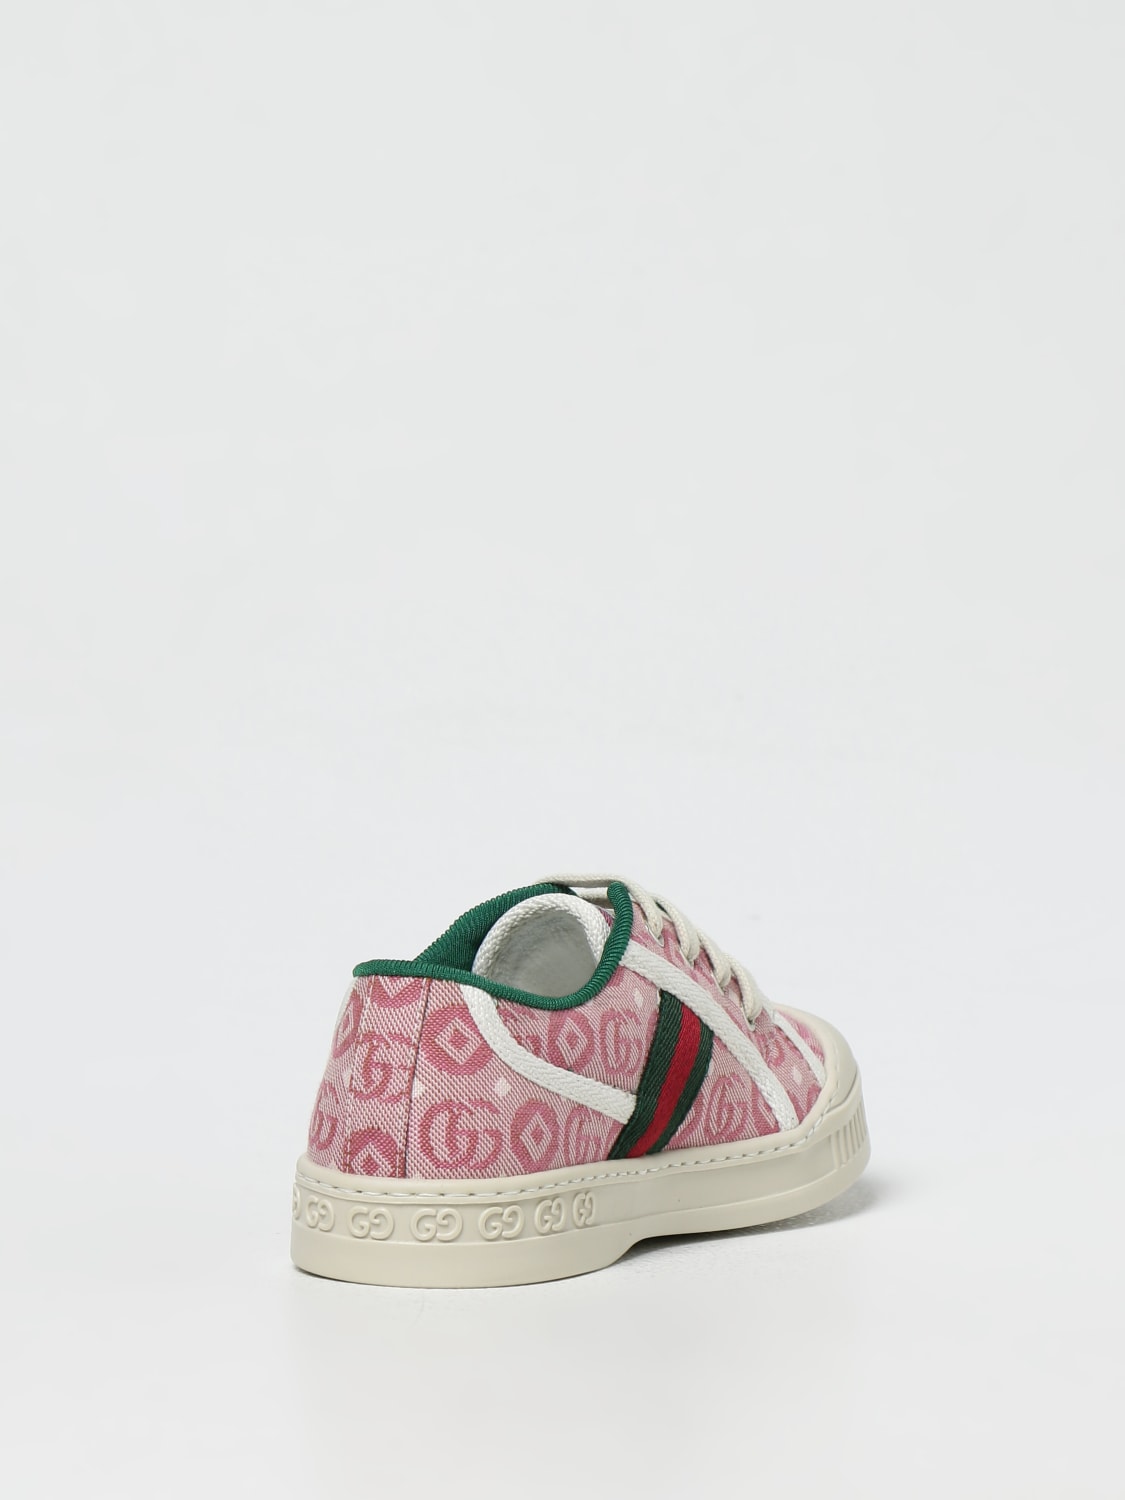 GUCCI: 1977 Tennis with jacquard monogram - | Gucci sneakers 682229U4G50 online at GIGLIO.COM